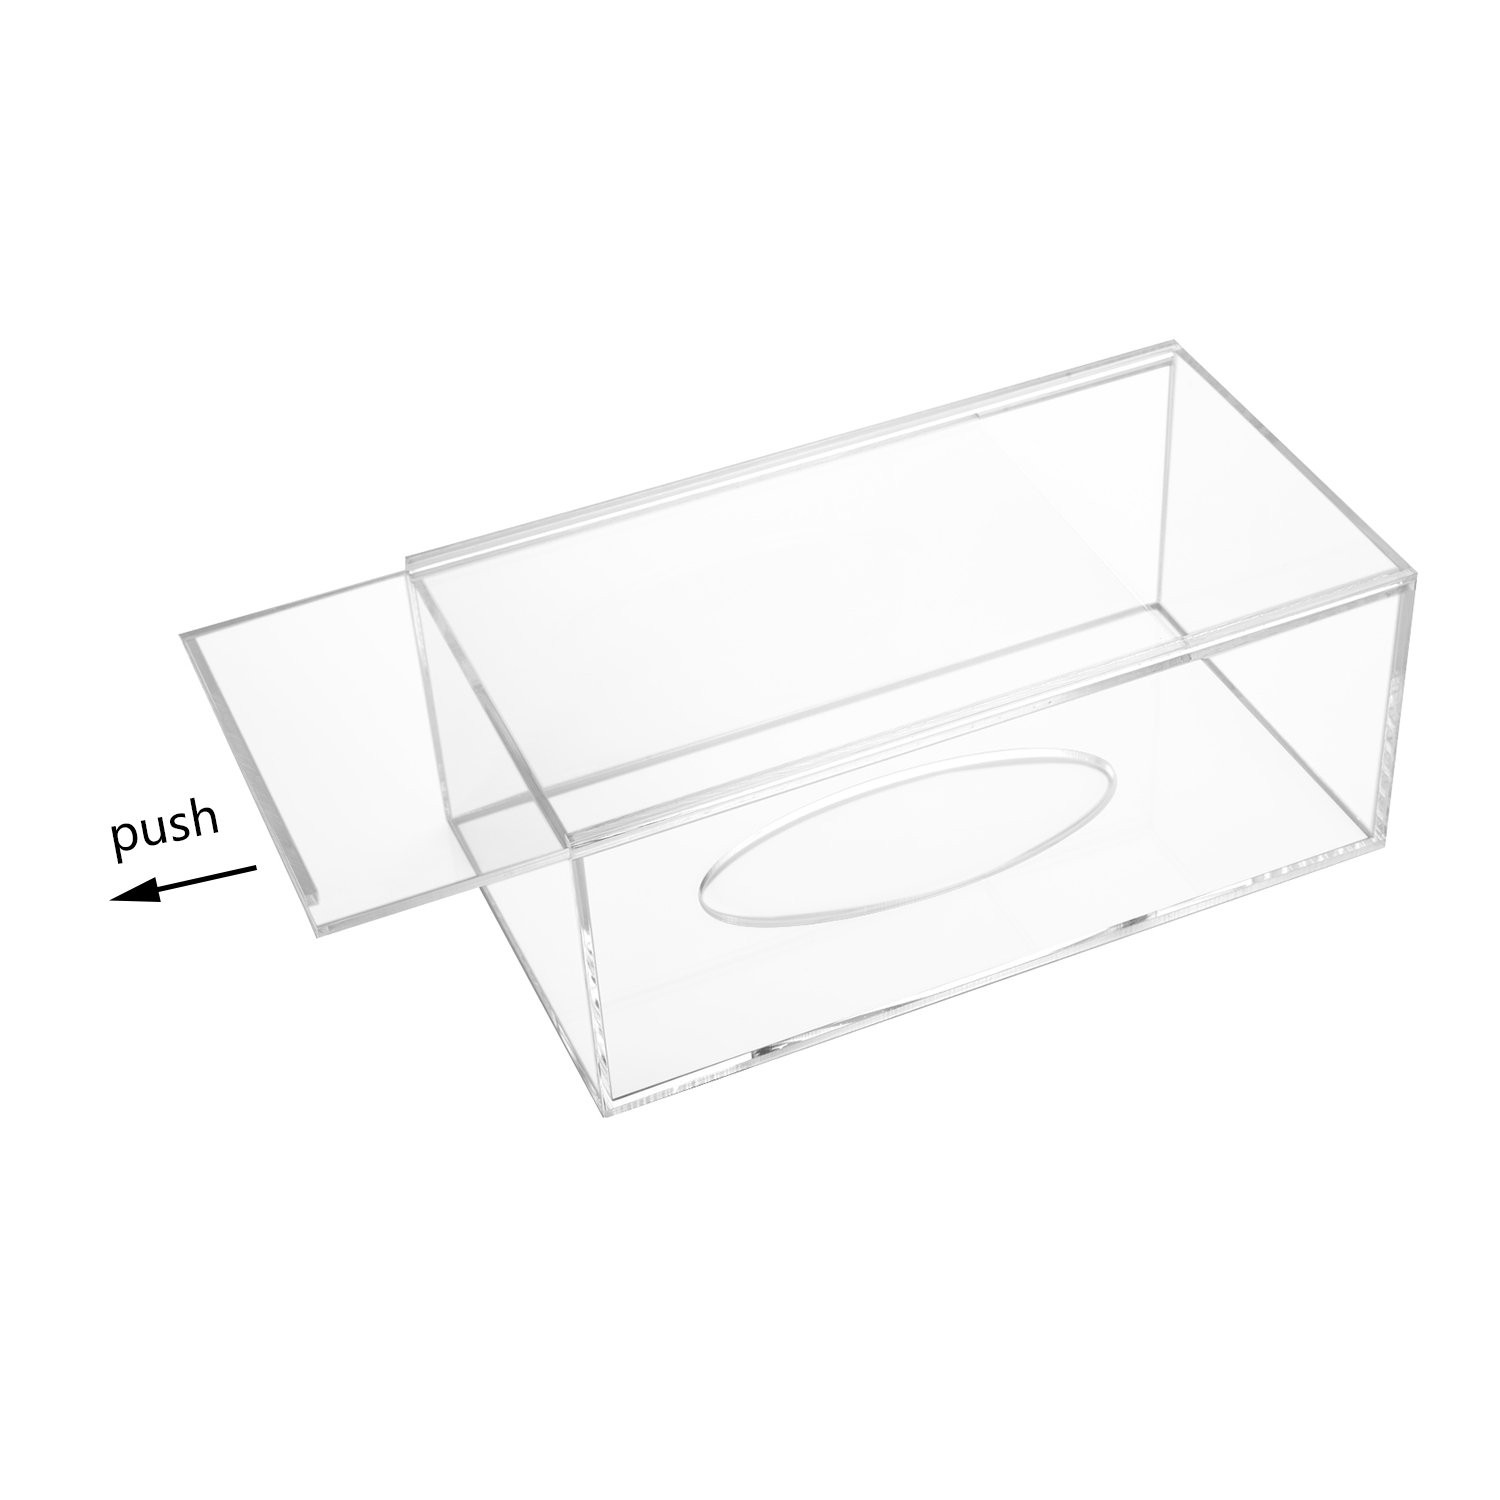 Acrylic Tissue Dispenser Box Storage Case Cover Container Manufacturers, Acrylic Tissue Dispenser Box Storage Case Cover Container Factory, Supply Acrylic Tissue Dispenser Box Storage Case Cover Container